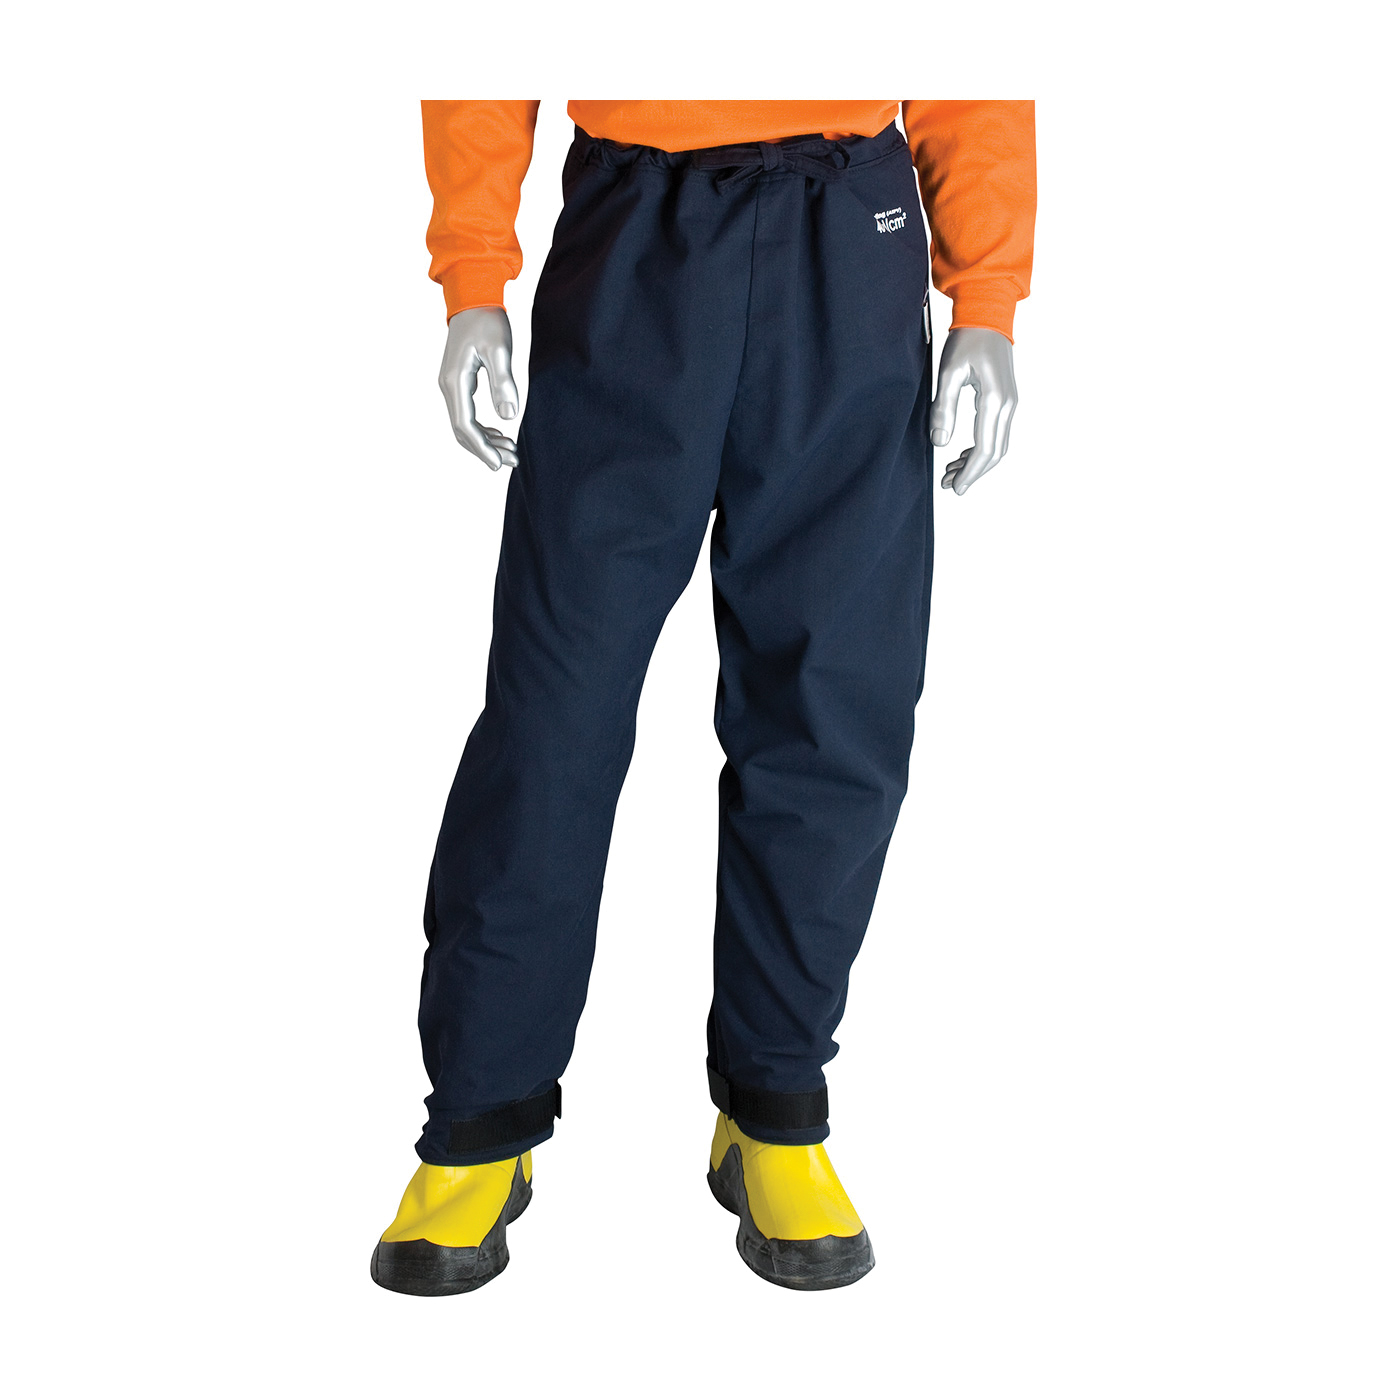 PIP® 9100-530ULT/M 9100-530ULT Ultralight Flame Resistant Pant, 36 to 38 in Waist, 32 in L Inseam, Navy Blue, DuPont™ Protera®/Westex® UltraSoft® Interlock Knit